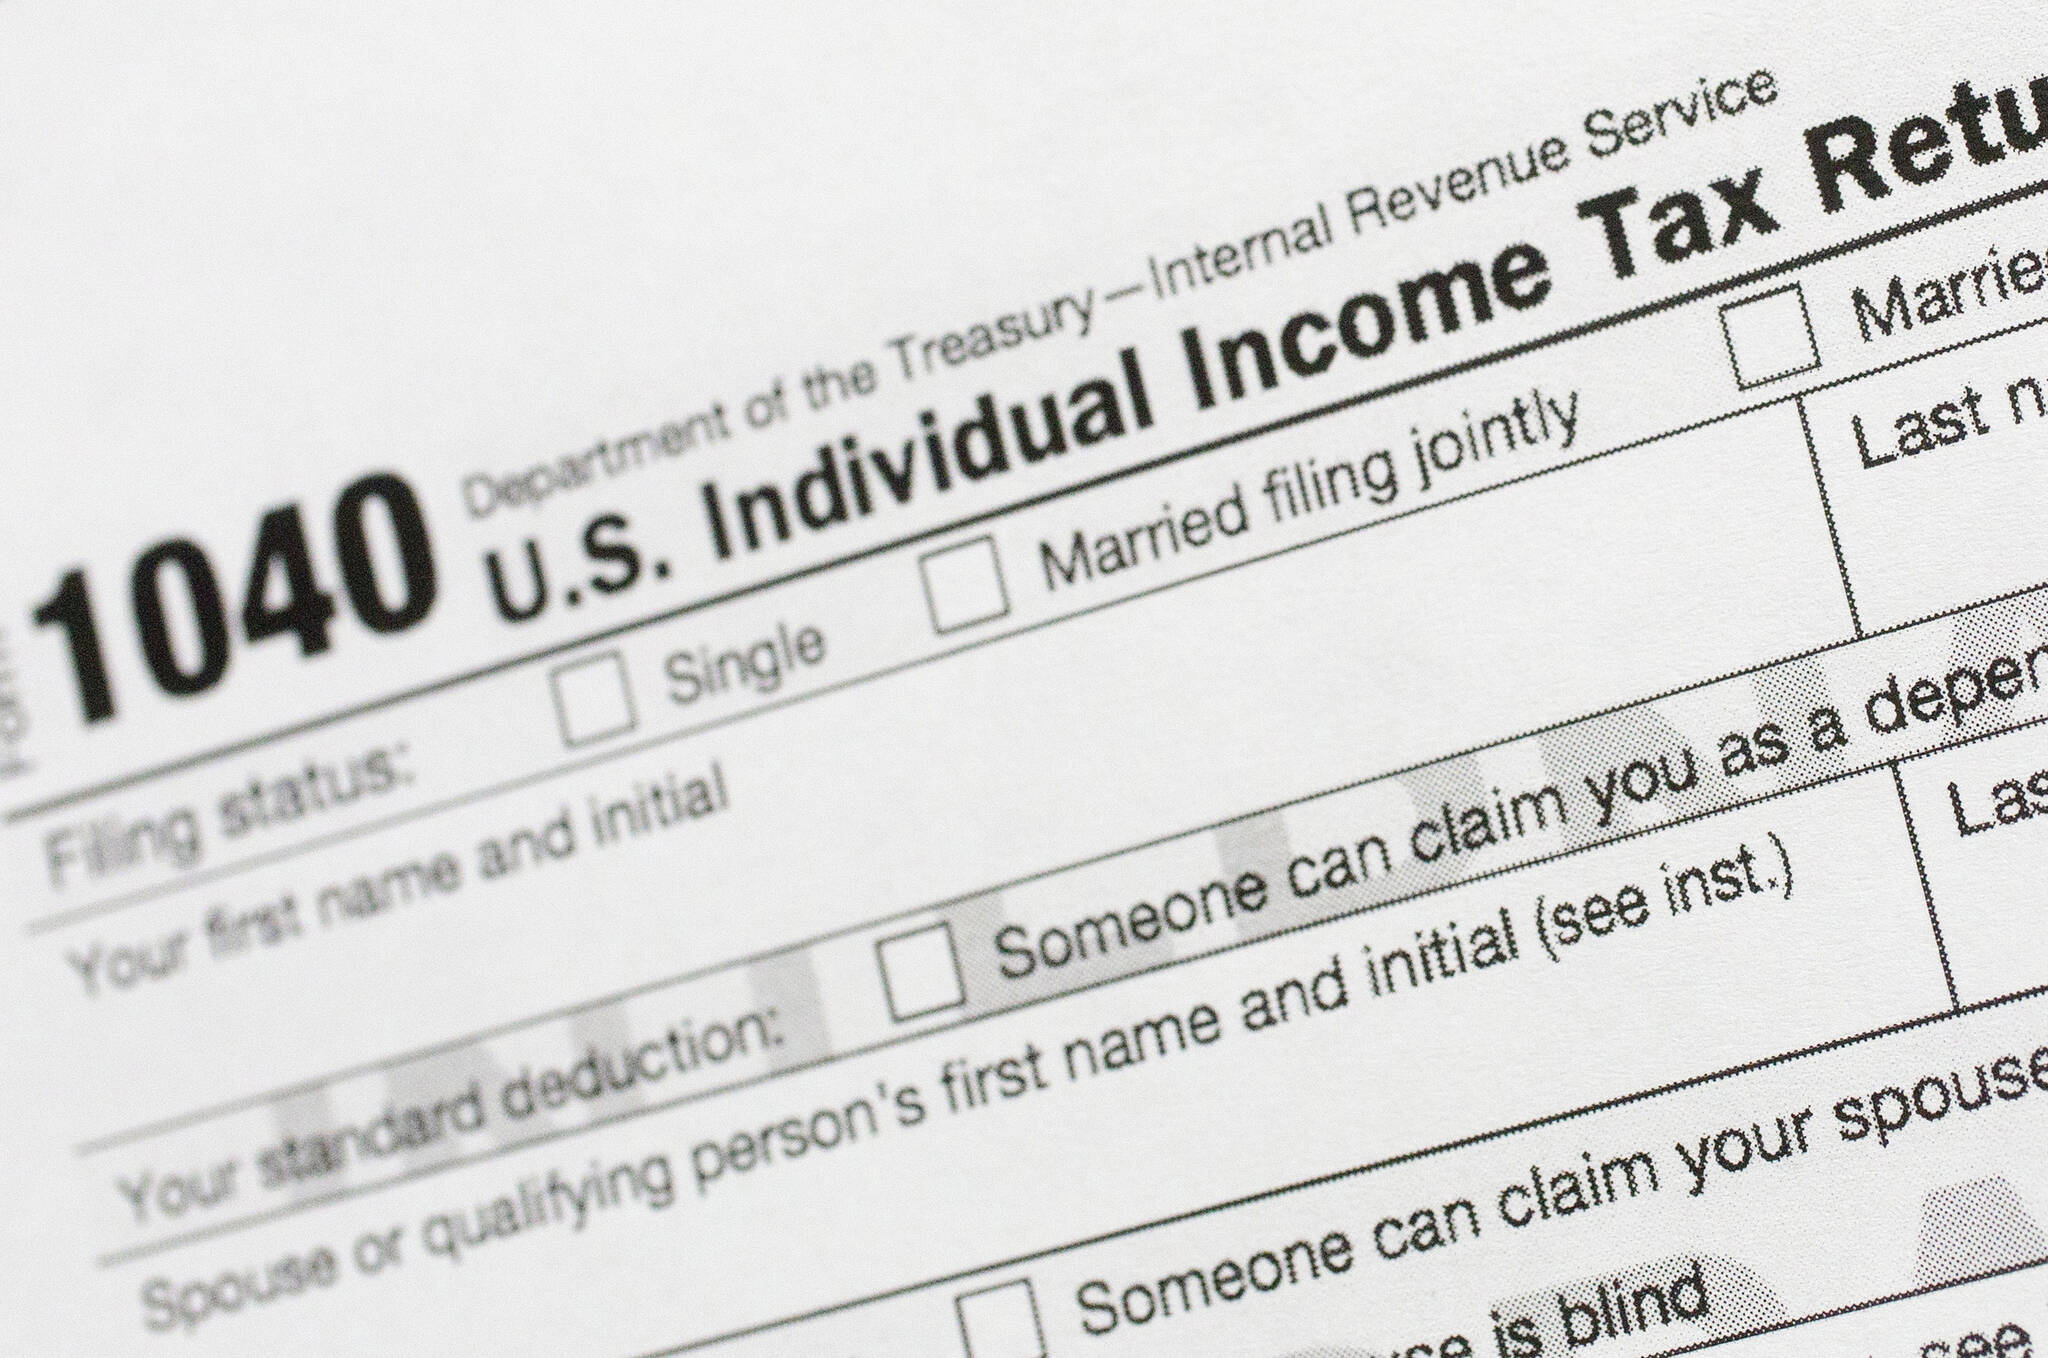 This July 24, 2018, file photo shows a portion of the 1040 U.S. Individual Income Tax Return form. (AP Photo / Mark Lennihan File)